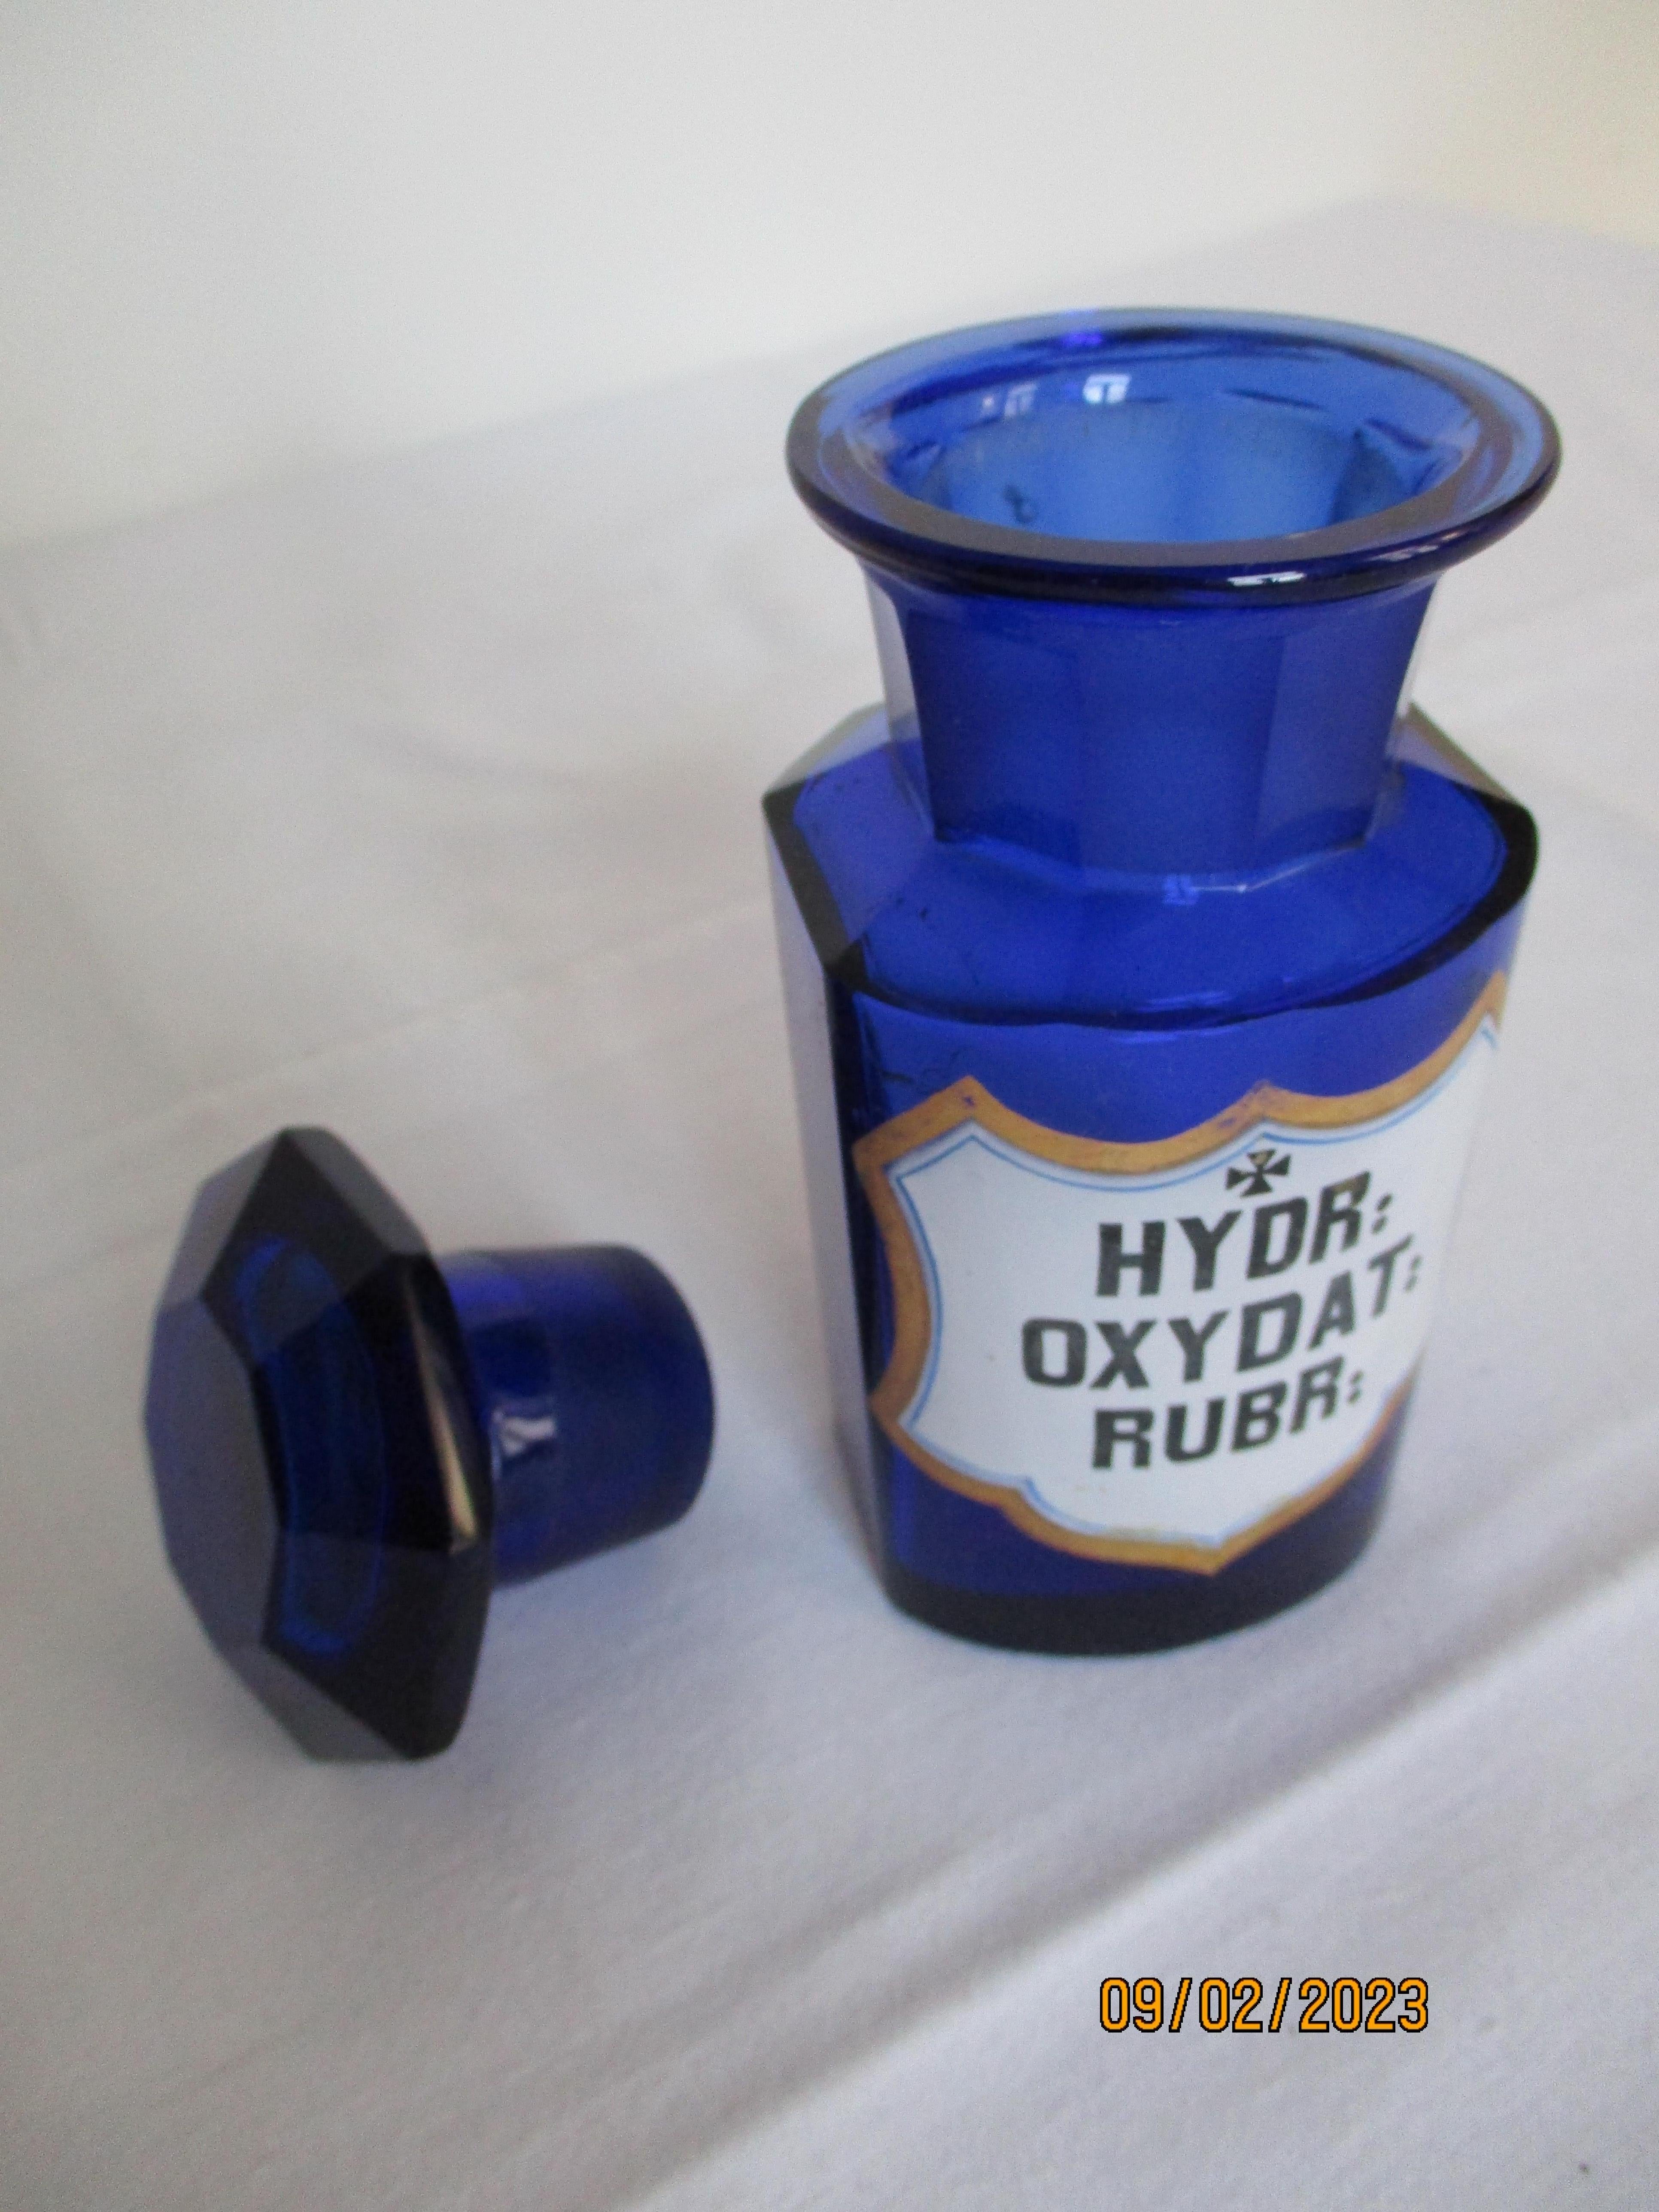 Rare and wonderful blue Victorian Pharmacy Jar. Excellent condition. Original inscribed HYDR:OXYDAT:RUBER on an enamelled shield, surrounded by a golden gilded frame. Facetaded shoulder. Comes from one of the oldest Viennese Pharmacys. Manufactured